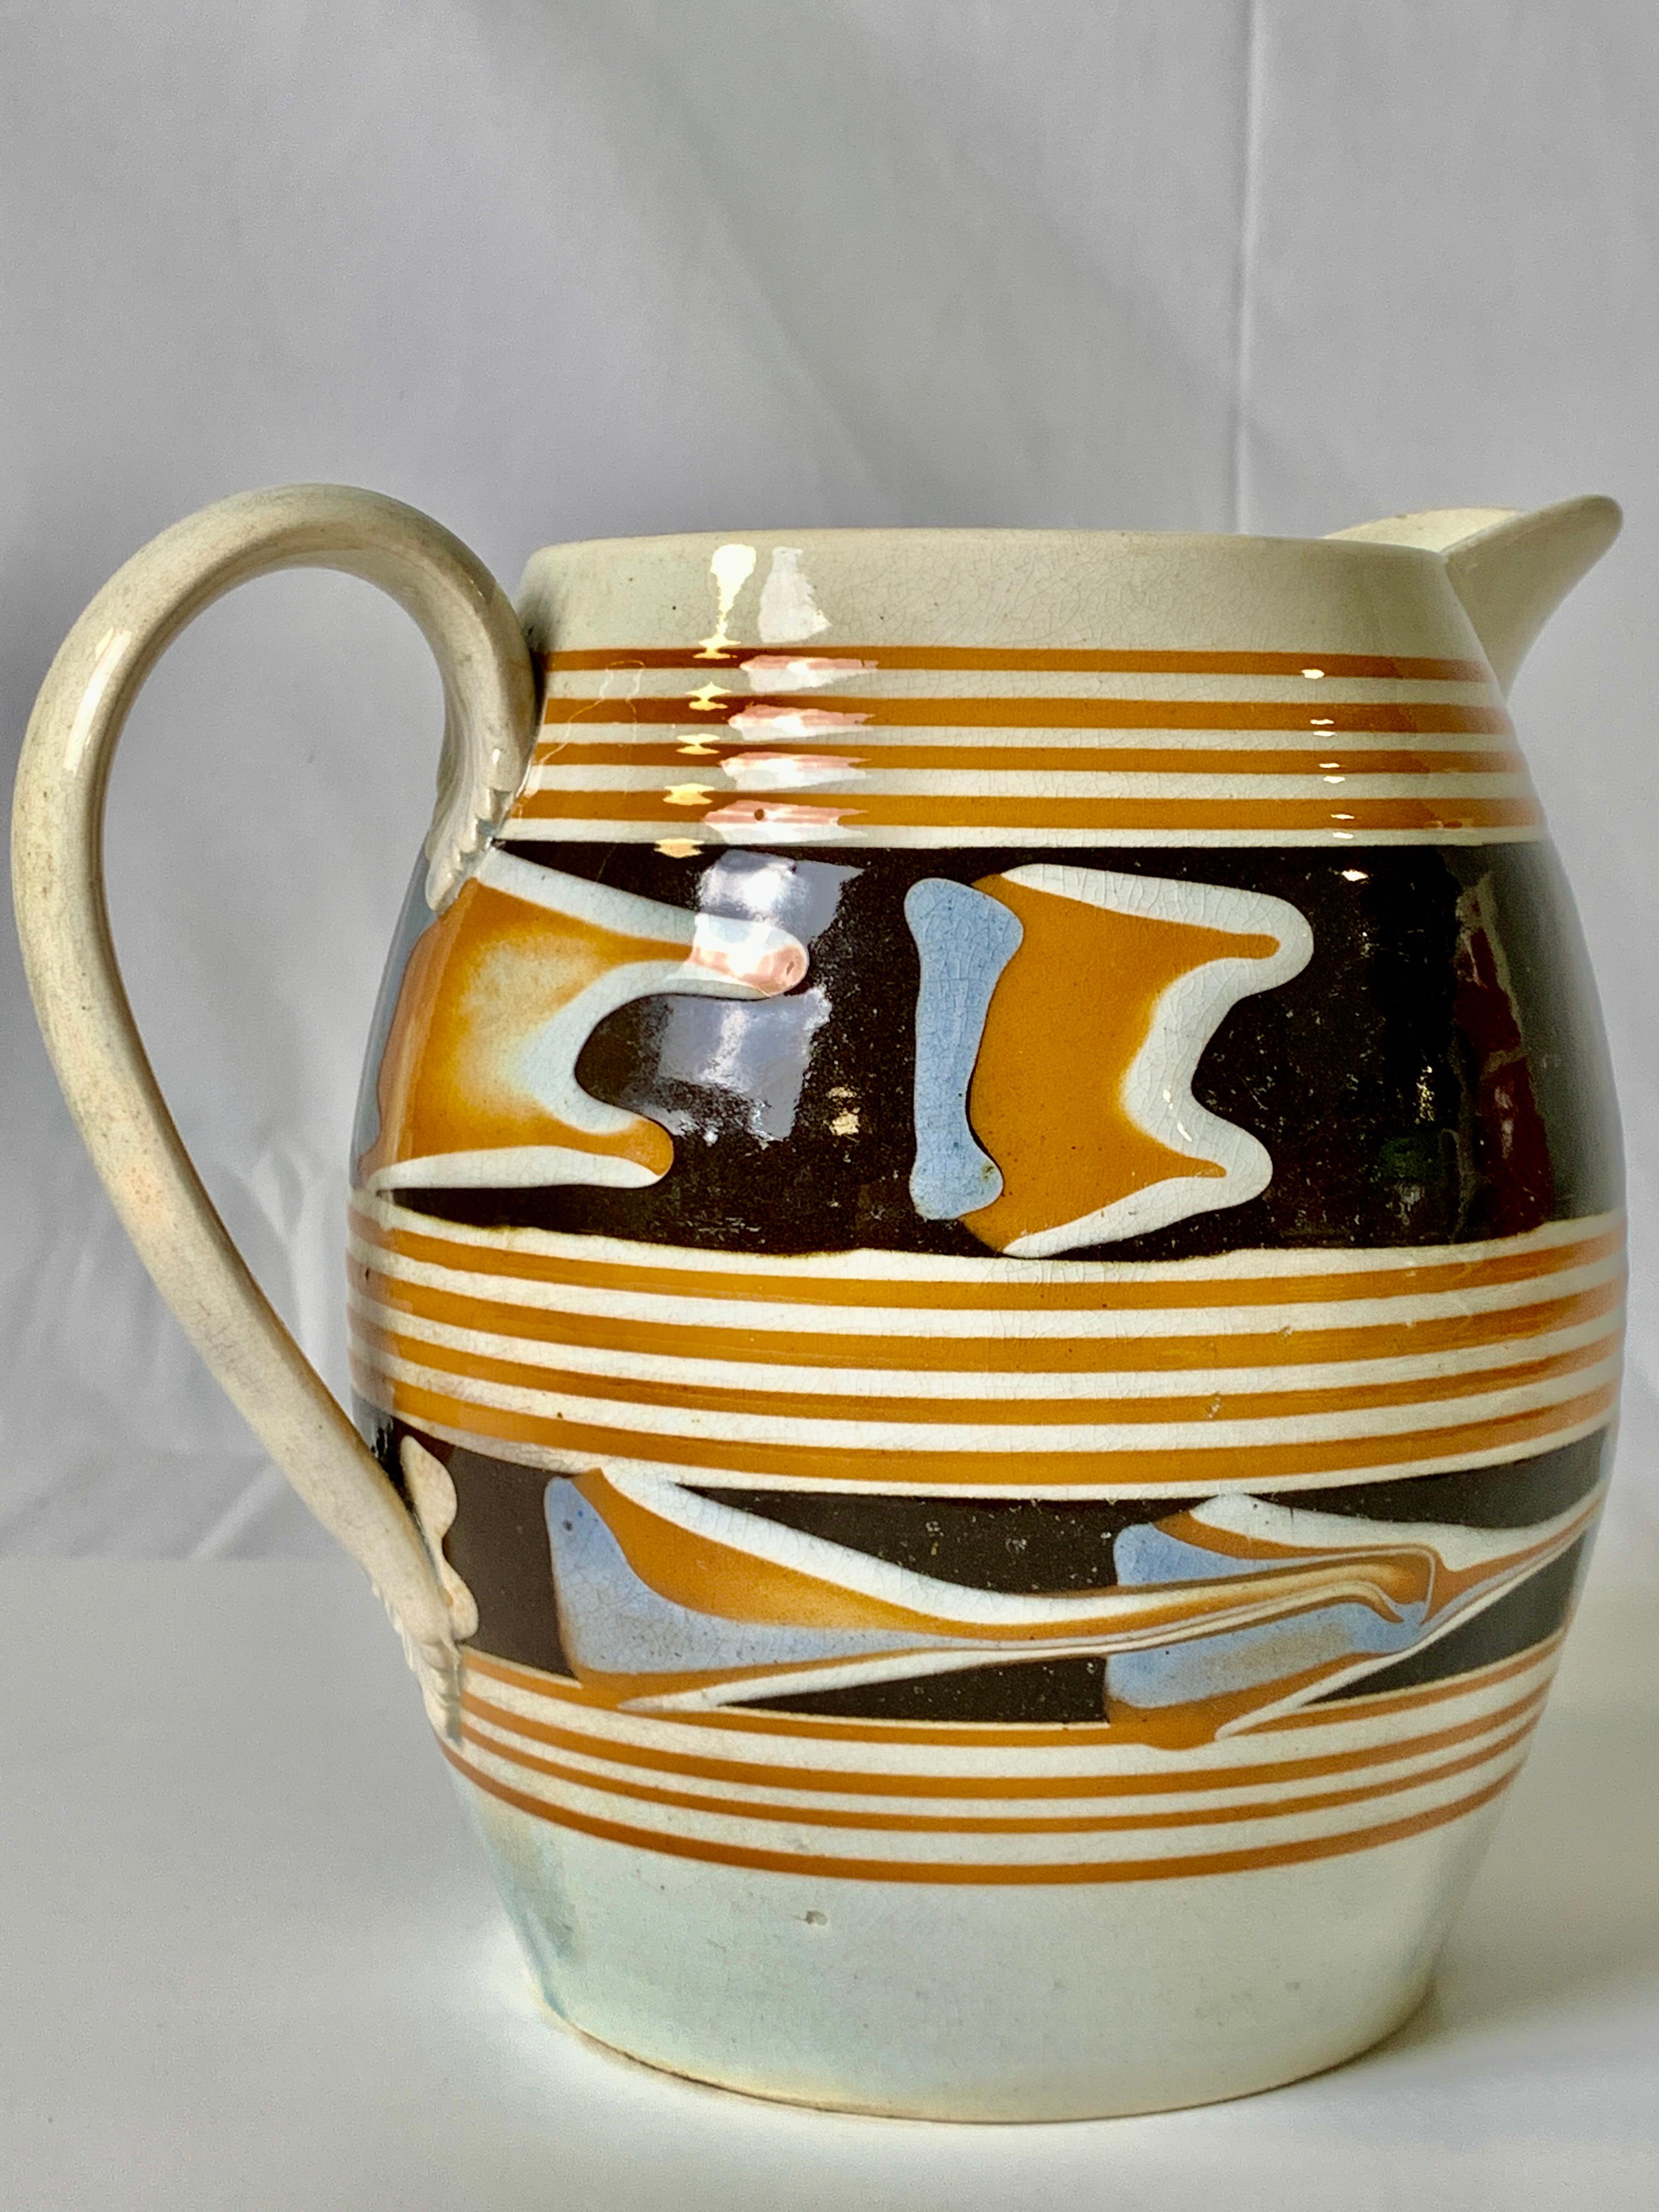 Country Mochaware Pitcher Made in England, circa 1820